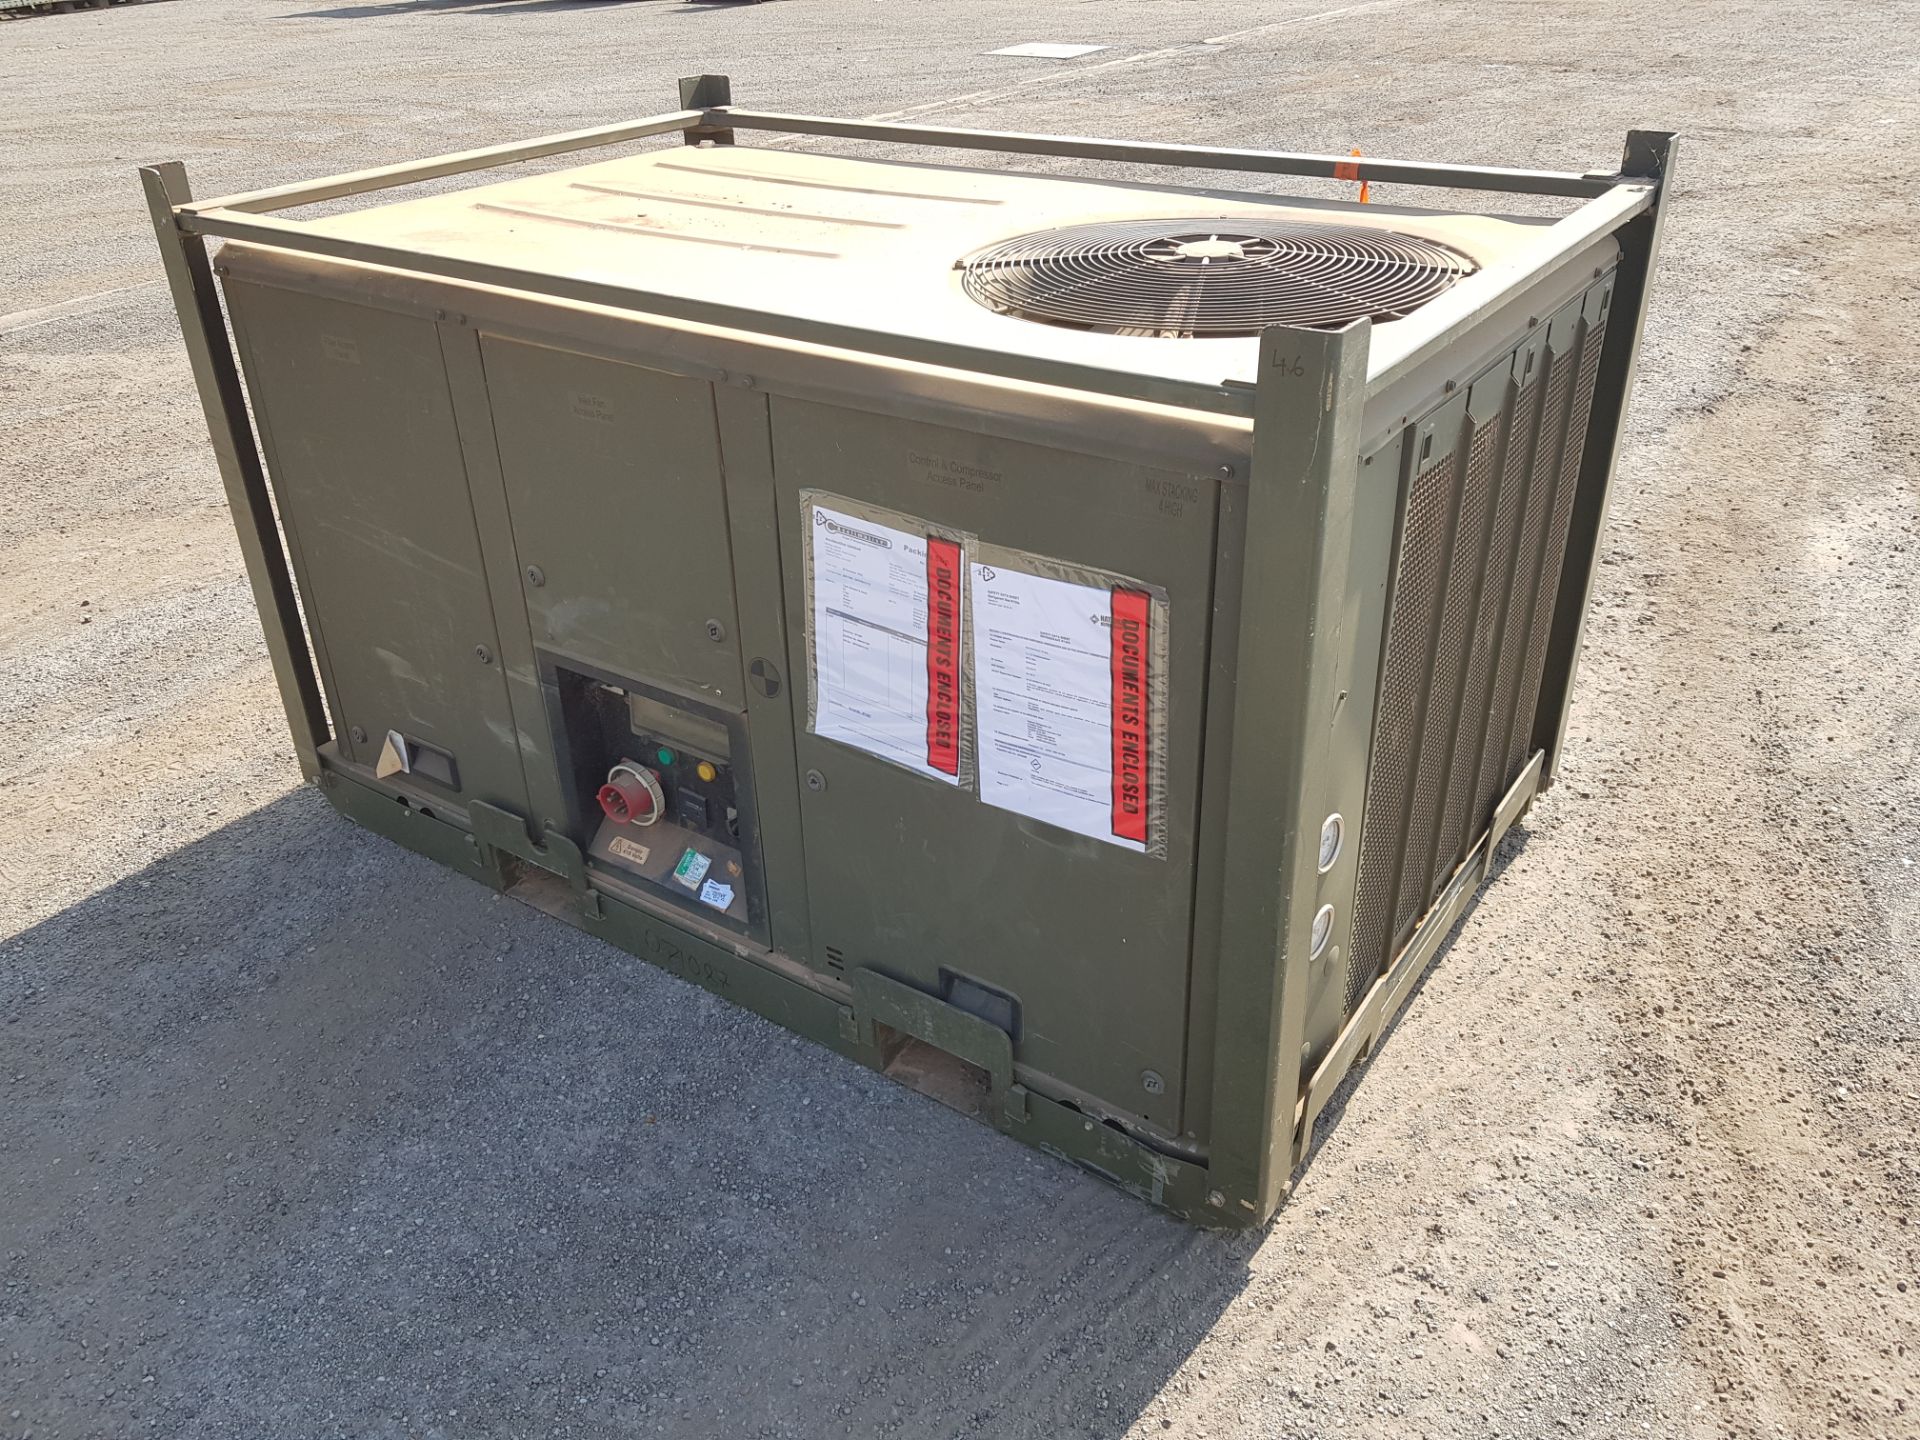 Acclimatise 15kW cooling or heating Environment Control Unit (ECU) - W 1810 x D 1180 x H 1010mm - Image 2 of 3